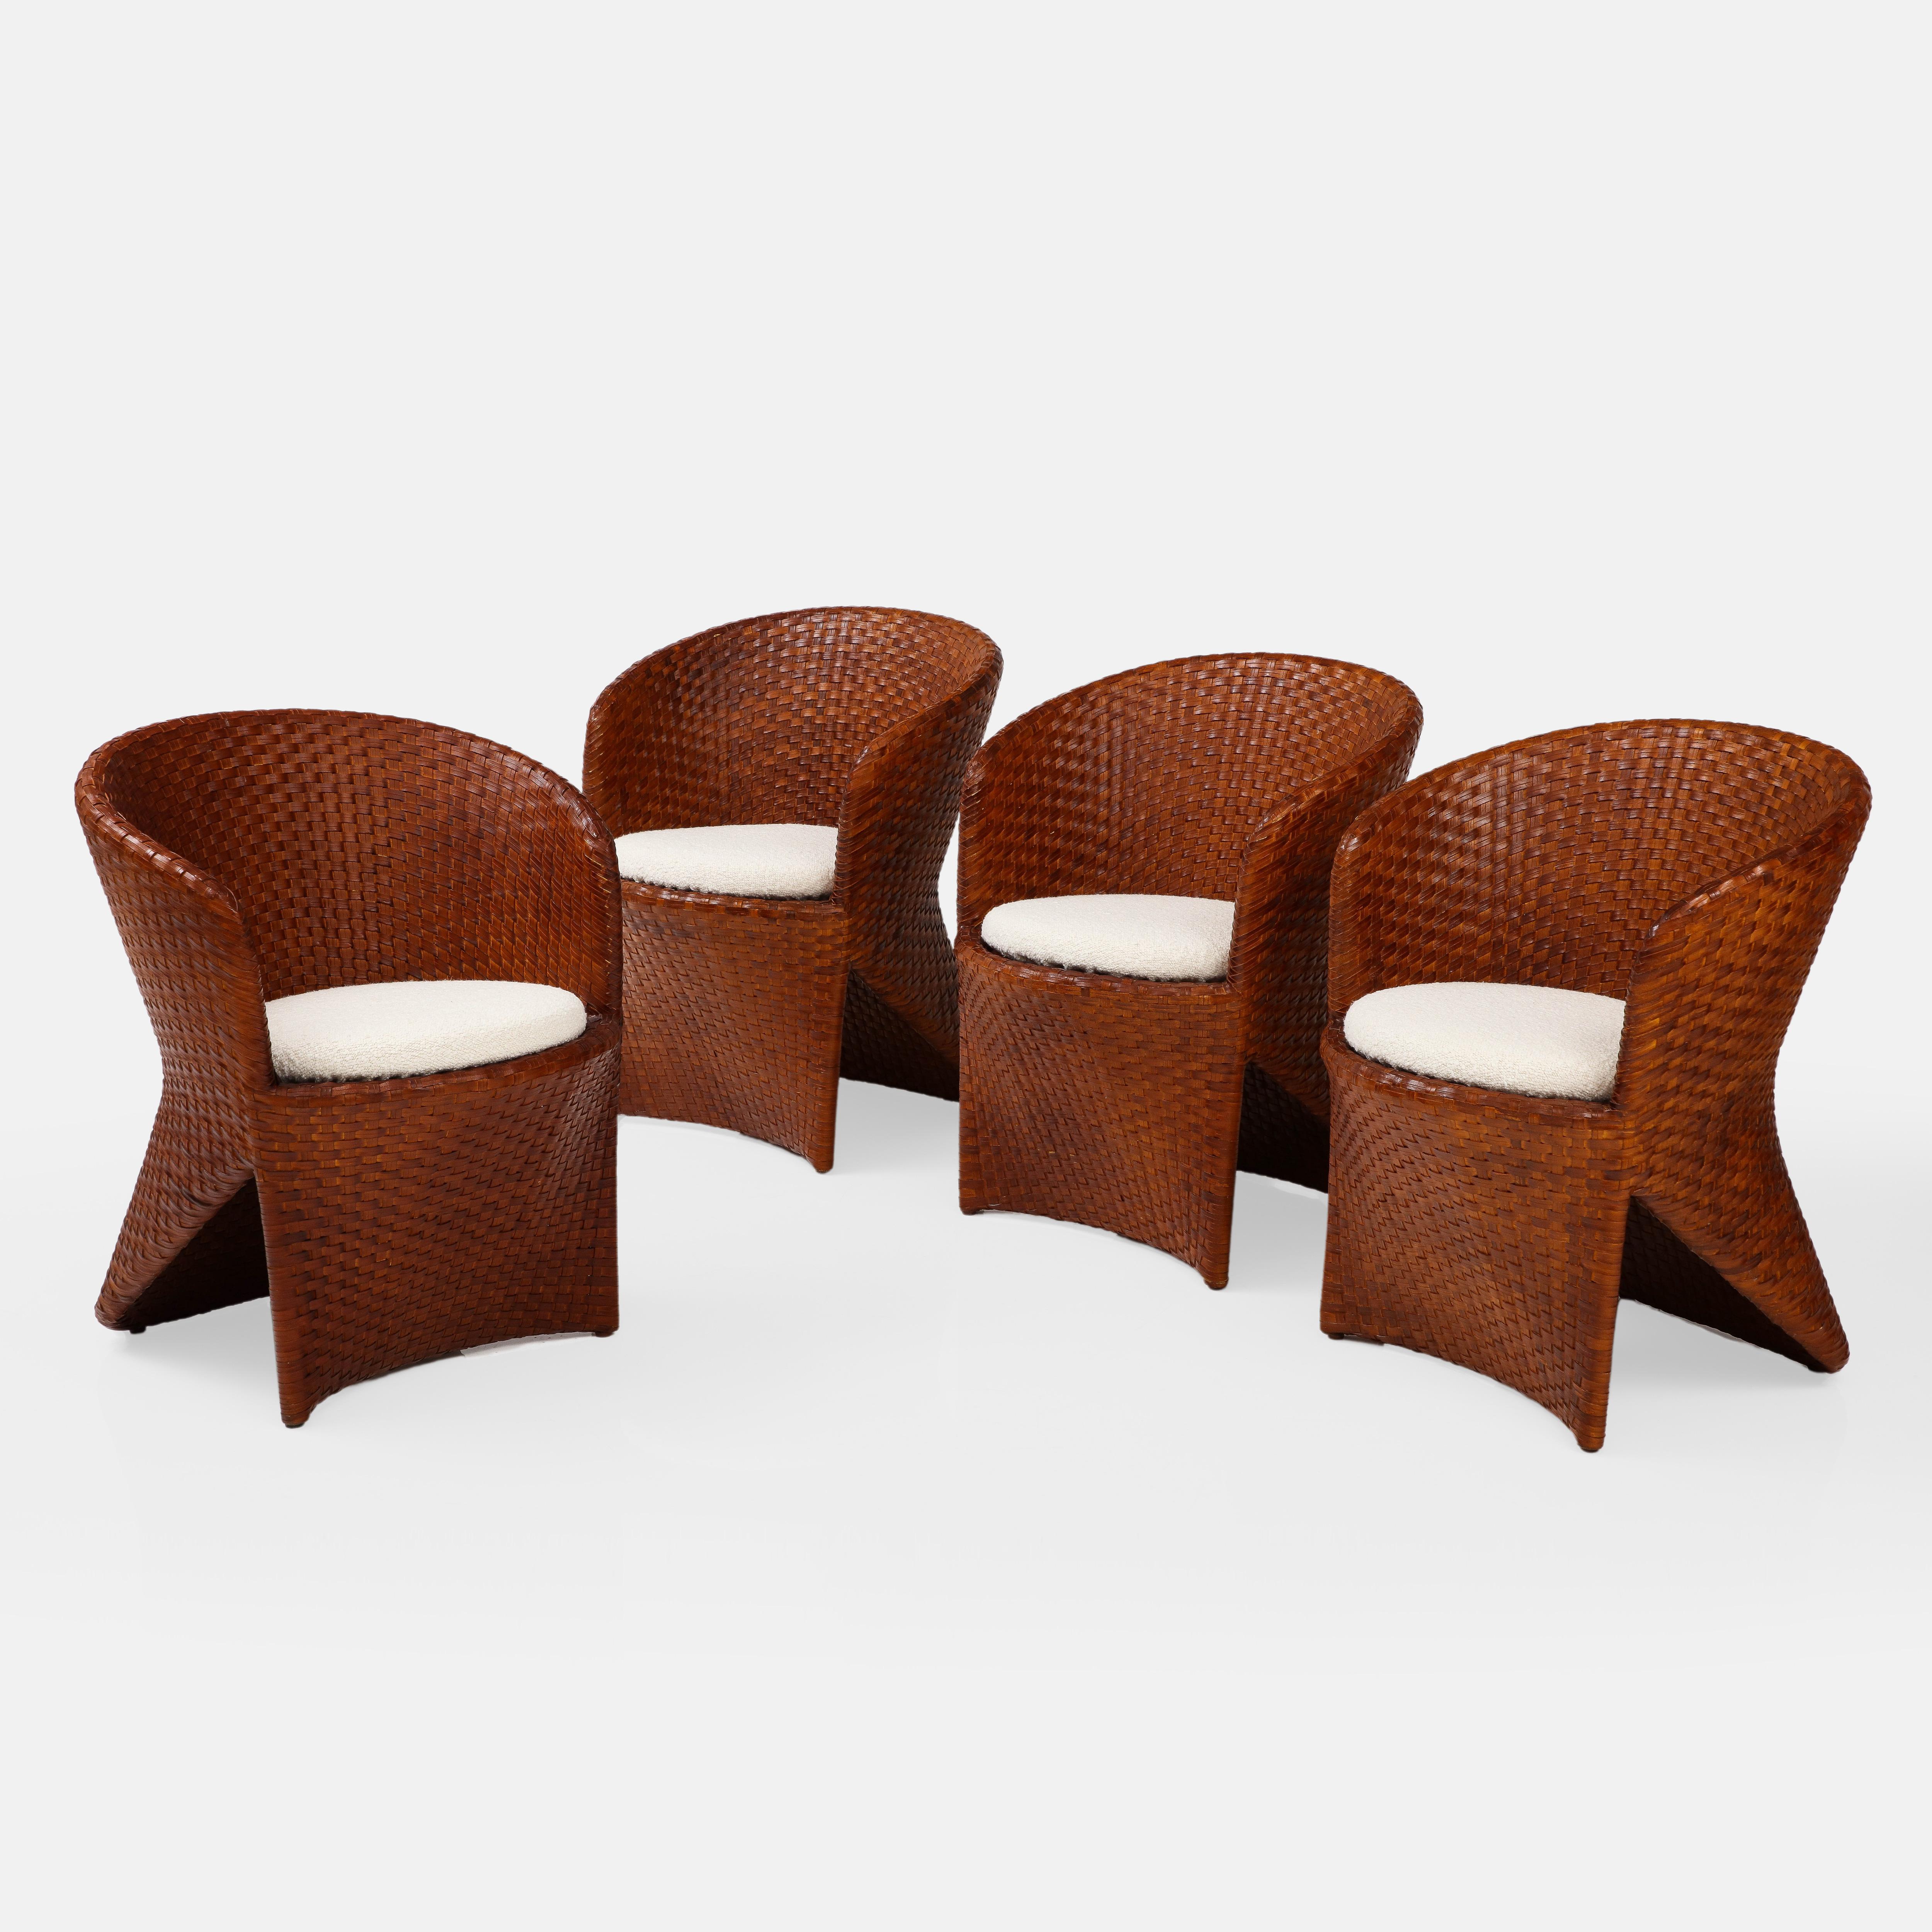 Tito Agnoli for Bonacina Rare Carabou Dining Set in Rattan and Cherry Wood, 1991 In Good Condition For Sale In New York, NY